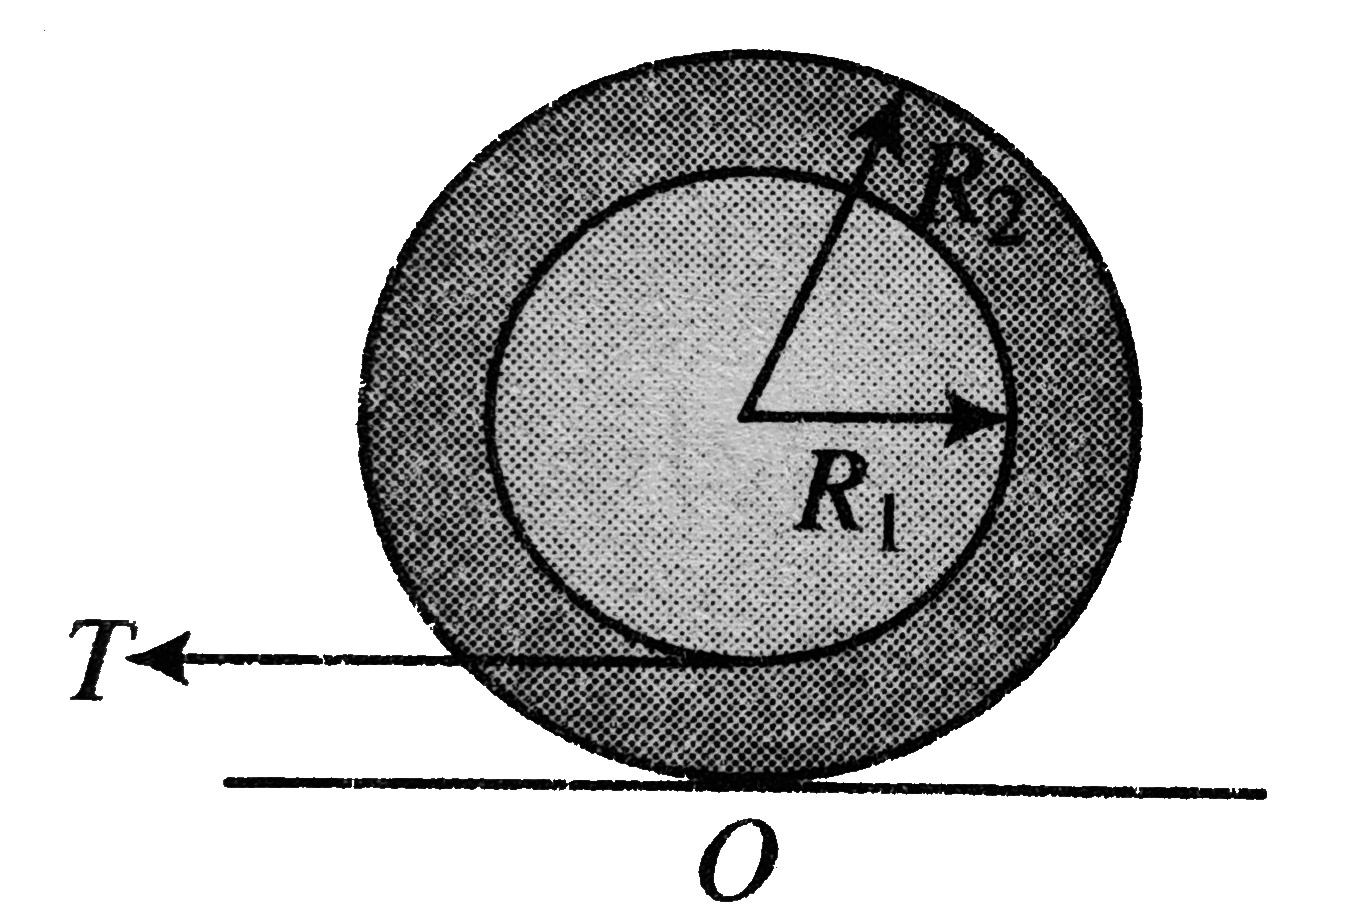 A stepped cylinder having mass 50 kg and a radius of gyration (K) of 0.30 m. The radii R(1) and R(2) are respectively 0.3 m and 0.6 m. A pull T equal to 200 N is exerted on the rope attached to inner cylinder. The coefficient of static and dynamic friction between cylinder and ground are 0.1 and 0.08 respectively.